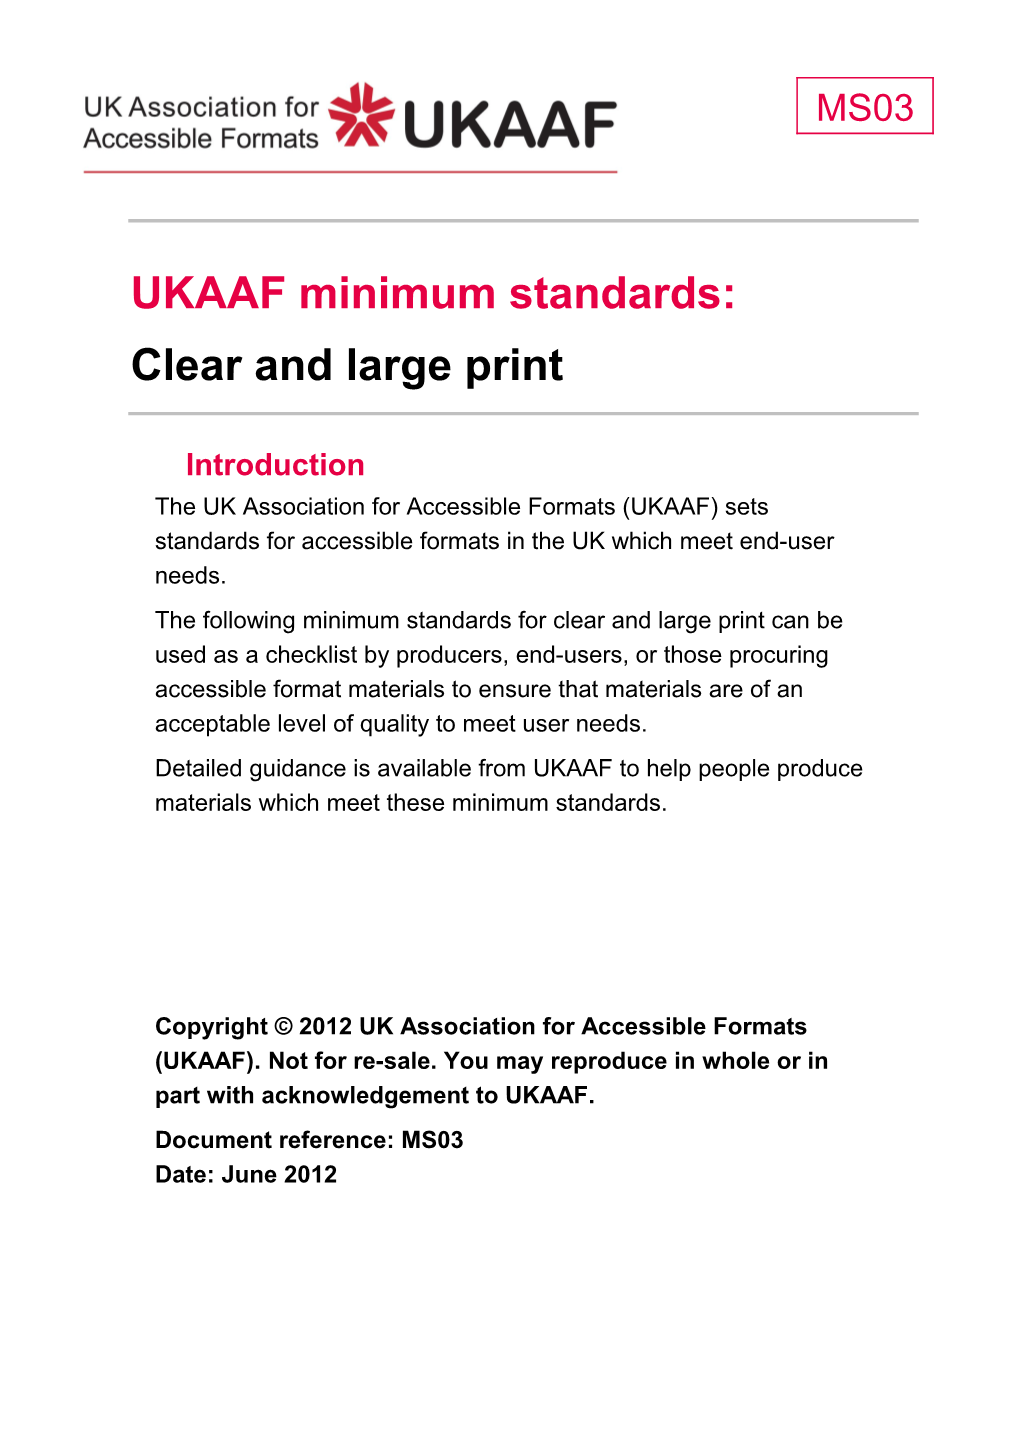 MS03 UKAAF Minimum Standards: Clear and Large Print